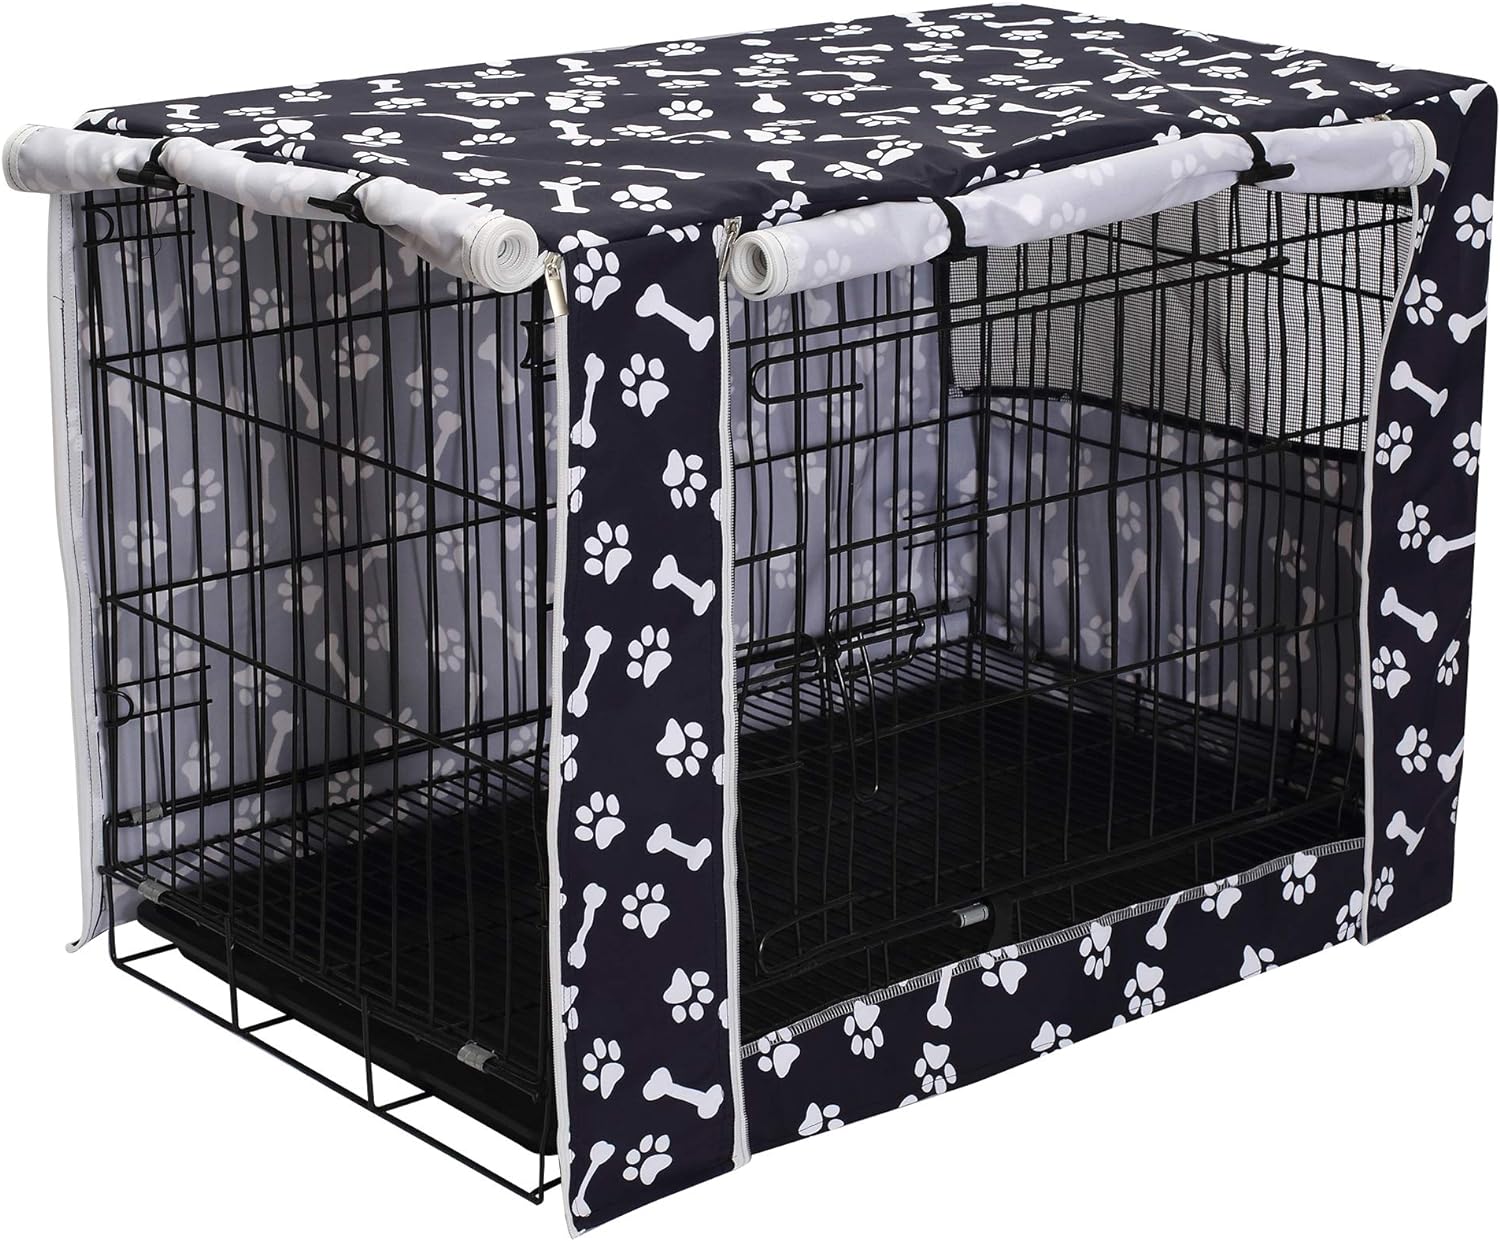 Geyecete Dog Crate Covers